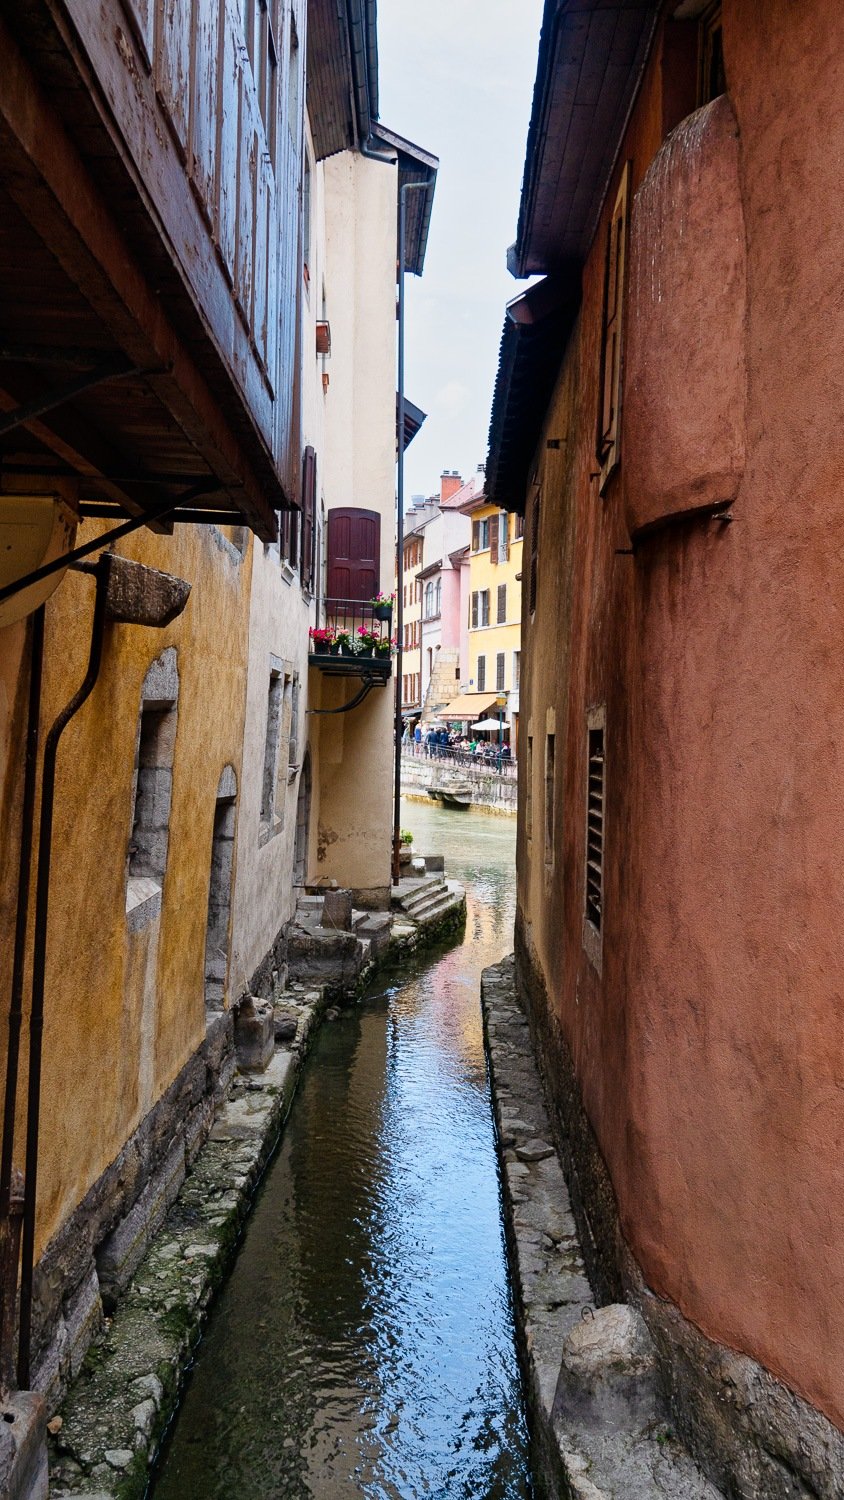  There are plenty of narrow passages to explore in this old part of town...but not this one perhaps!